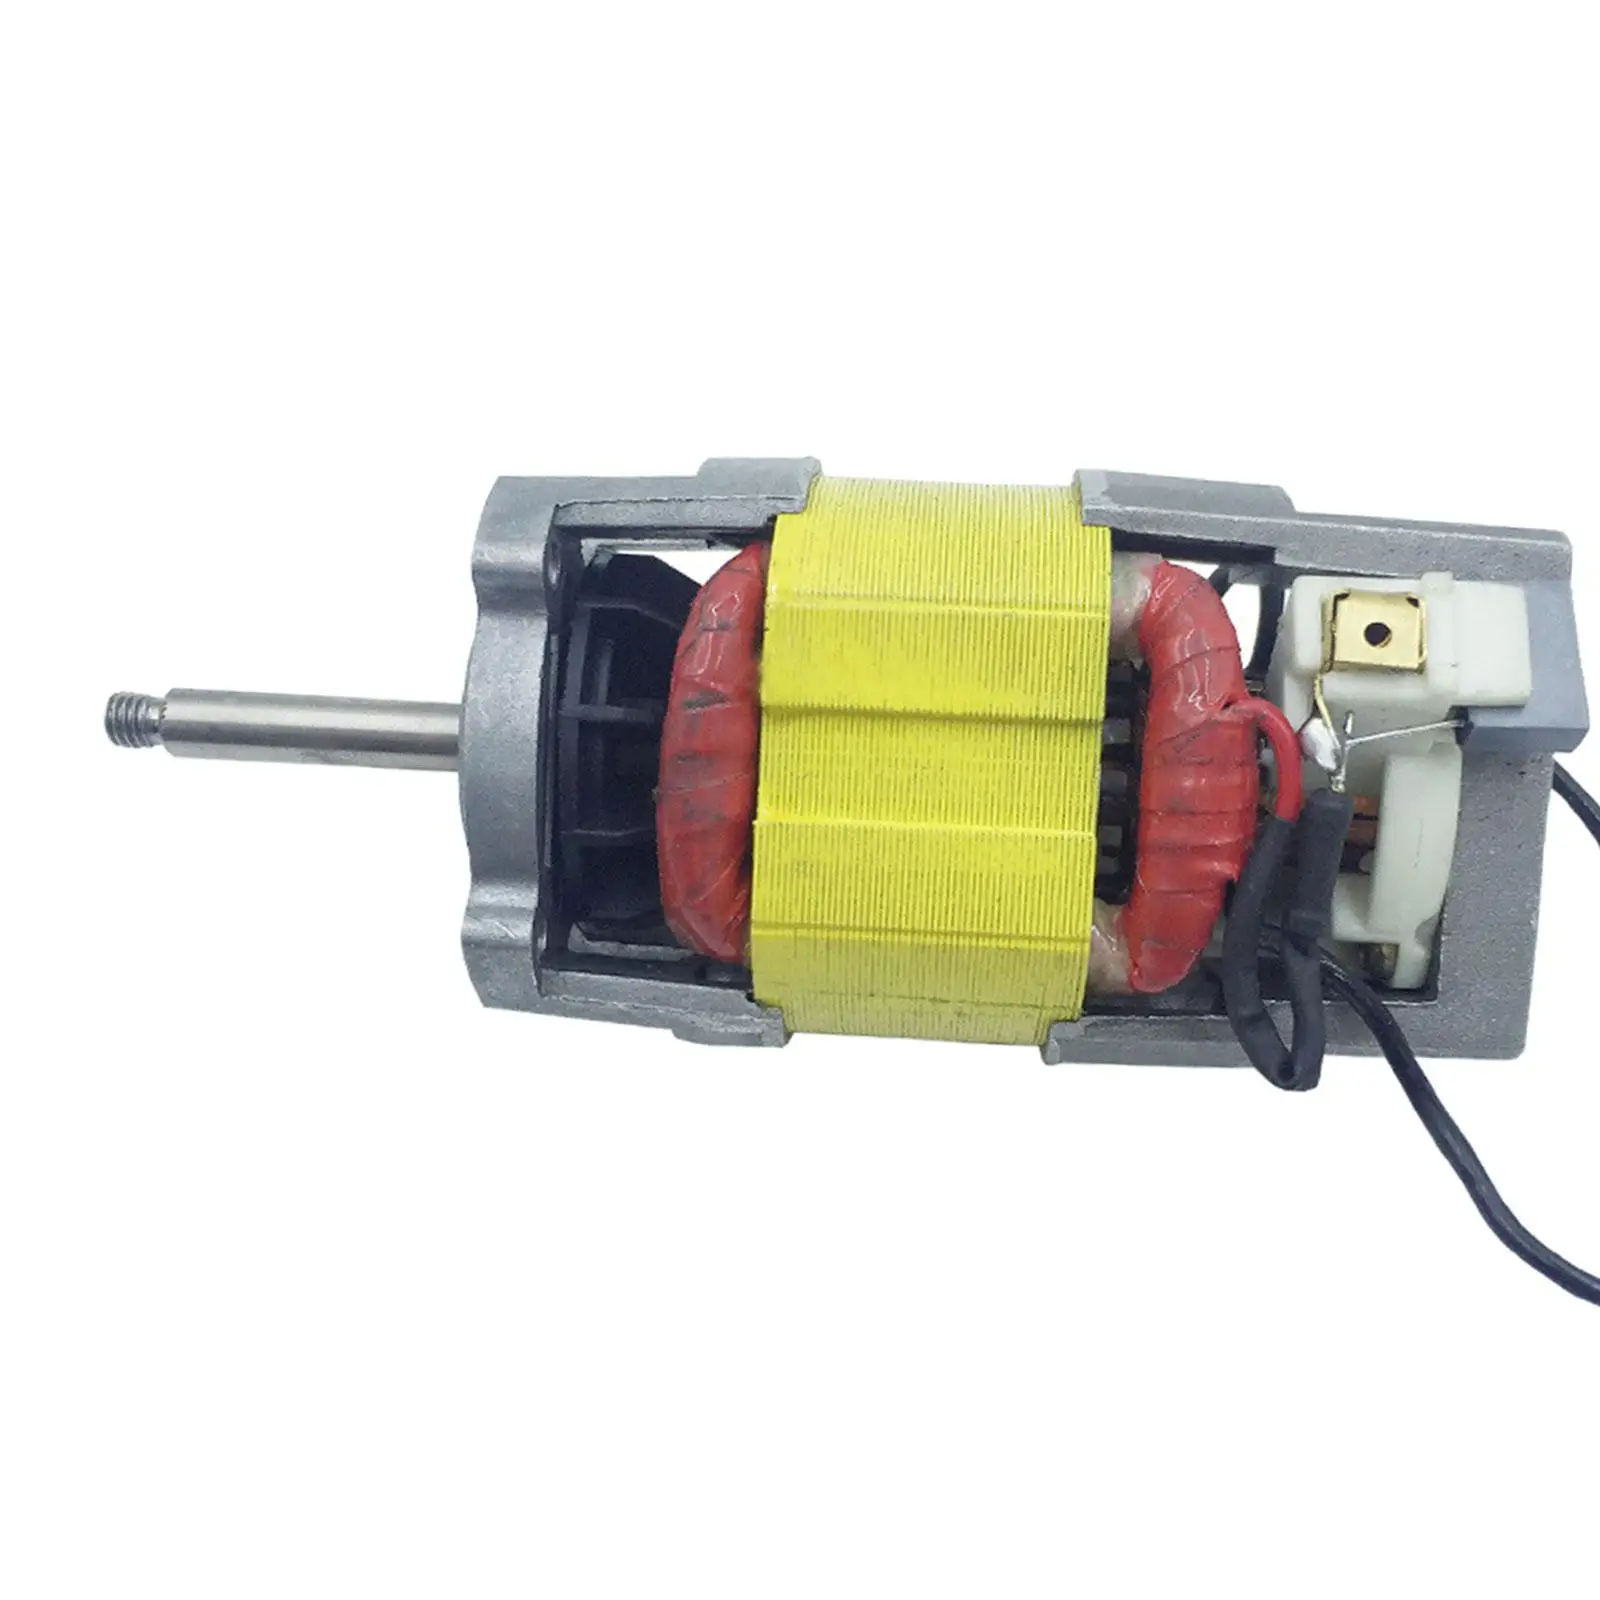 Hot Air Motor for Crafts, Shrinking, Paint Pure Copper Wire Material 50Hz Heavy Duty Hot Air Motor 1600W Electric Hot Air Motor